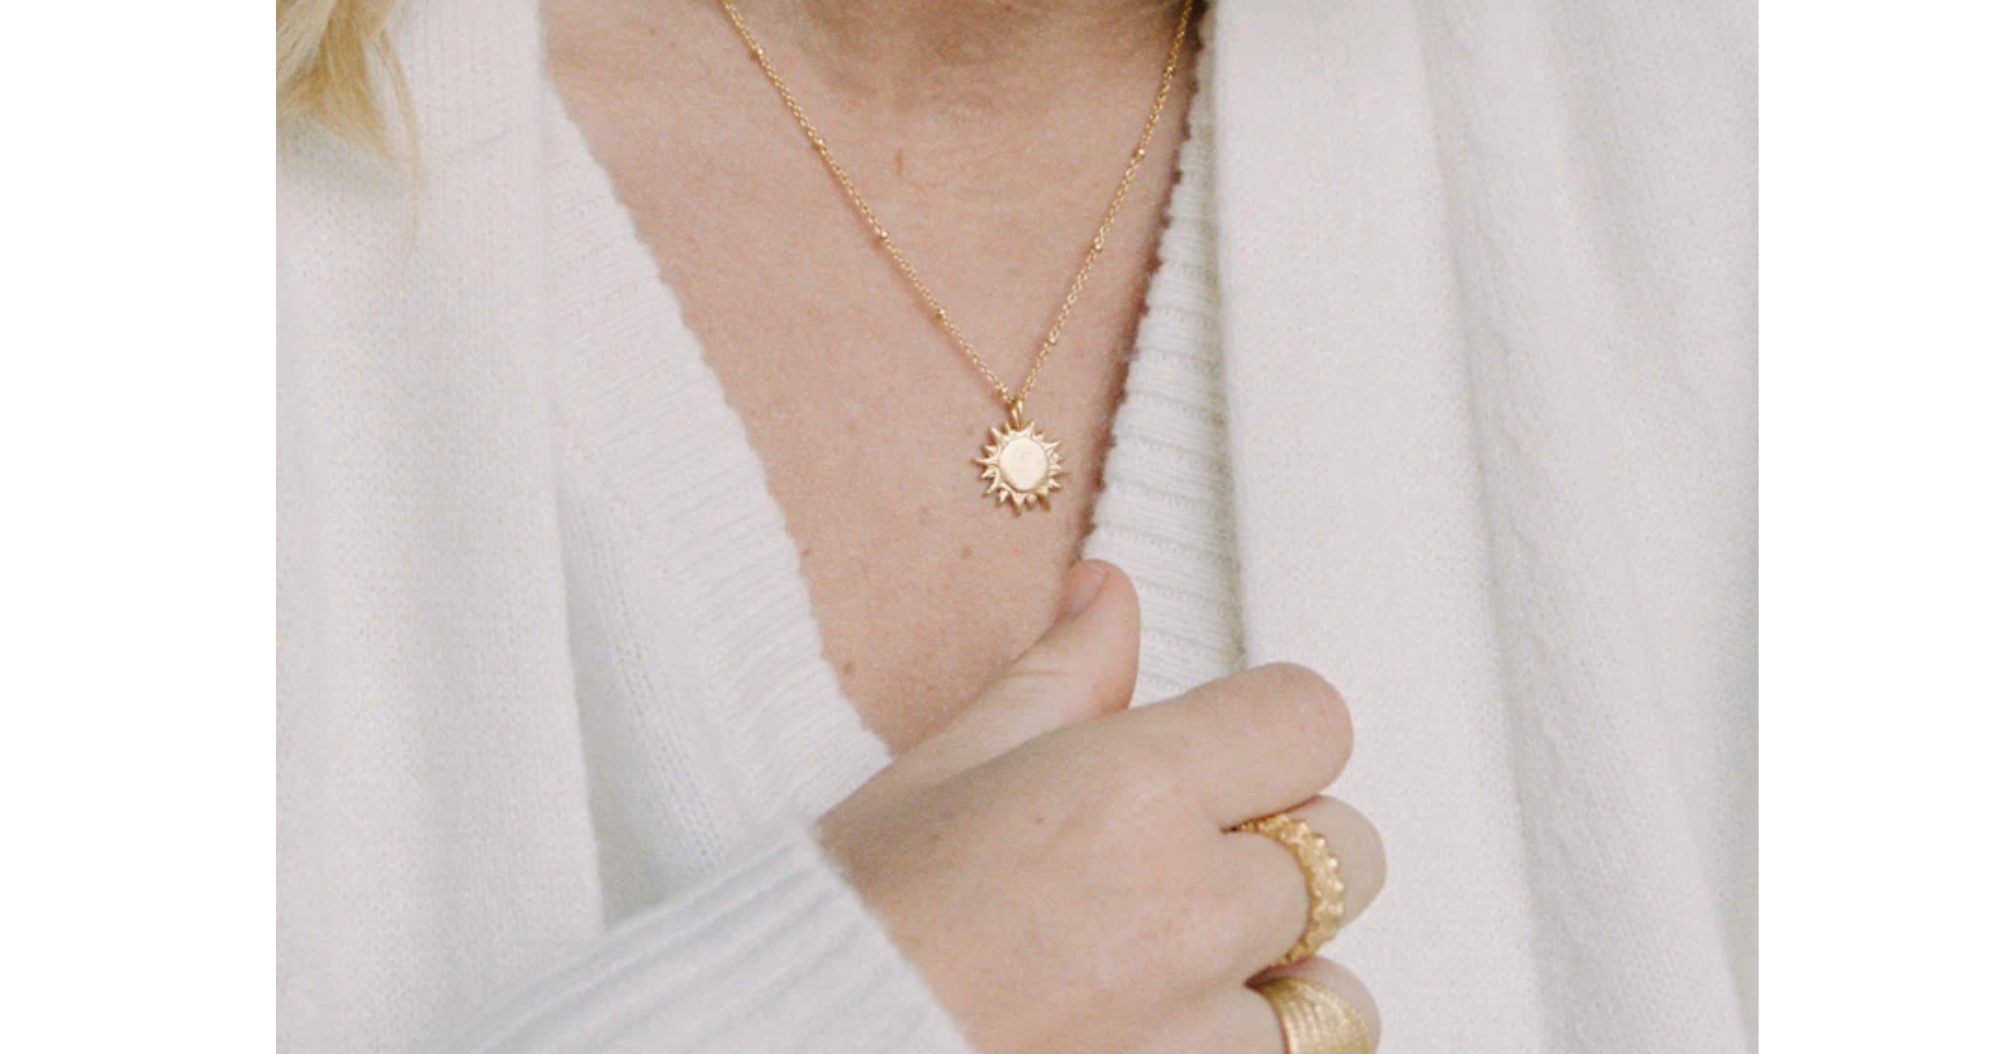 Is Gold-Plated Jewelry Good?